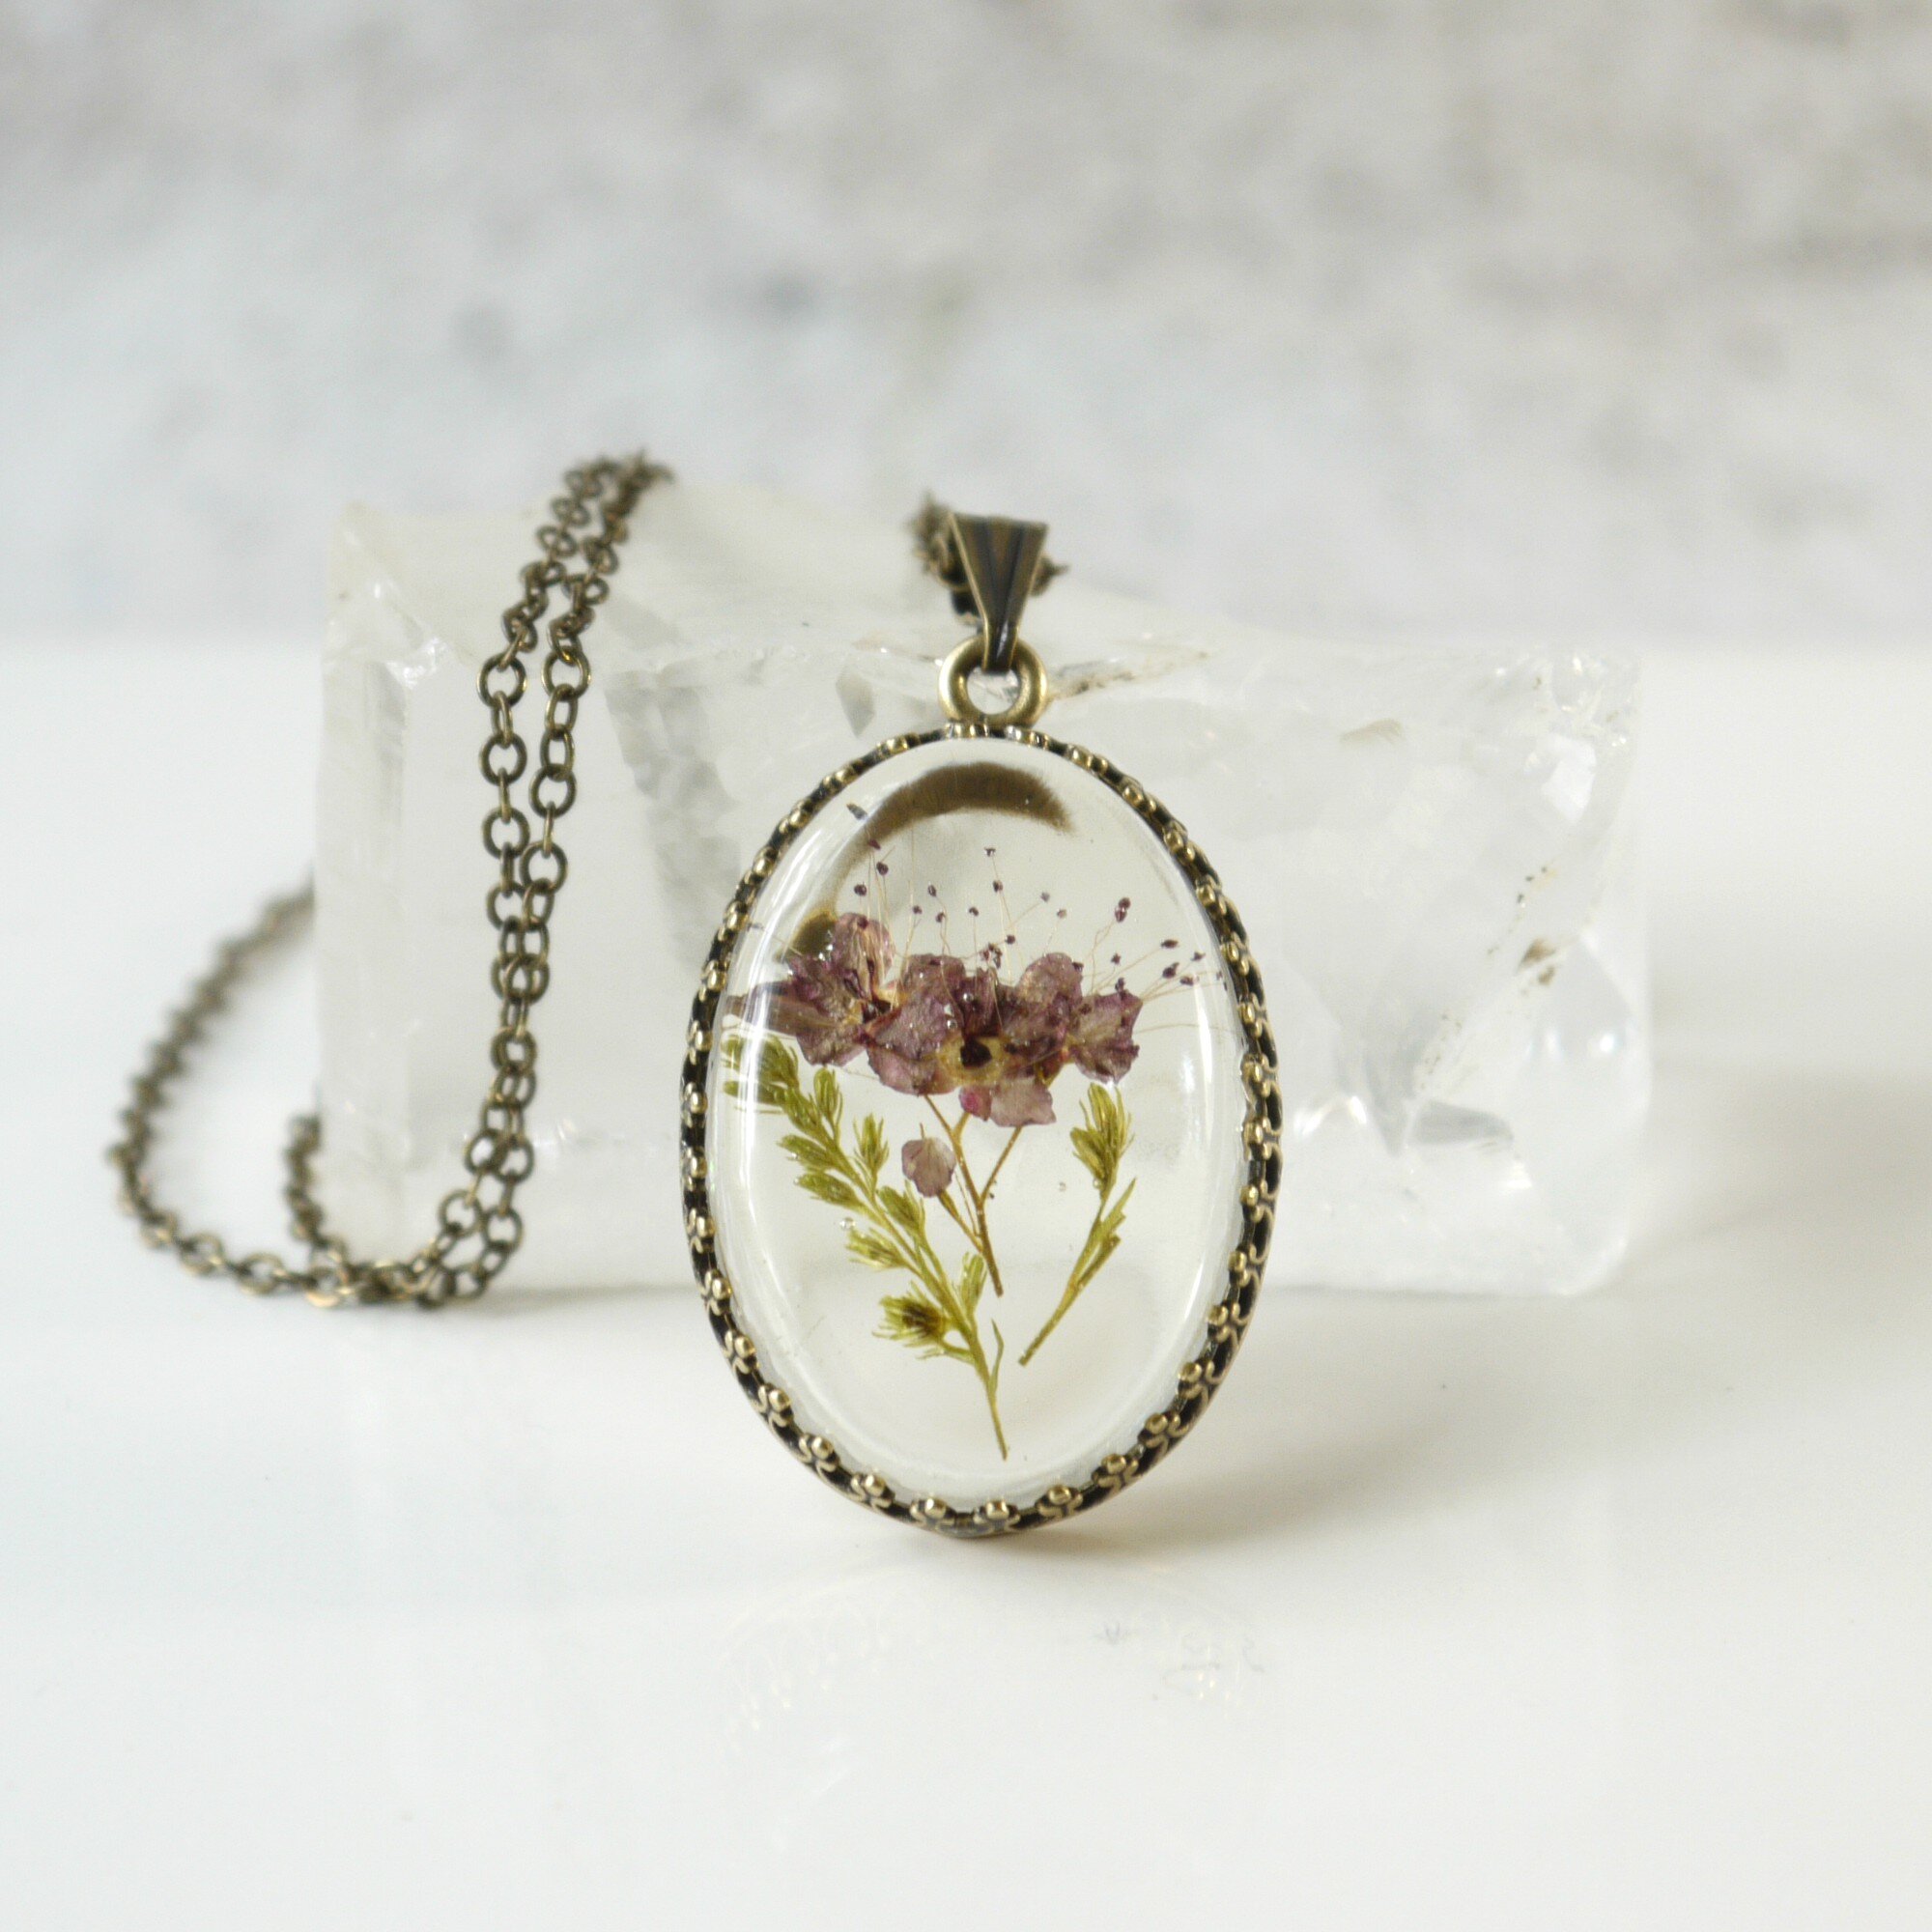 Handmade real pressed flower with Crystal rings necklace